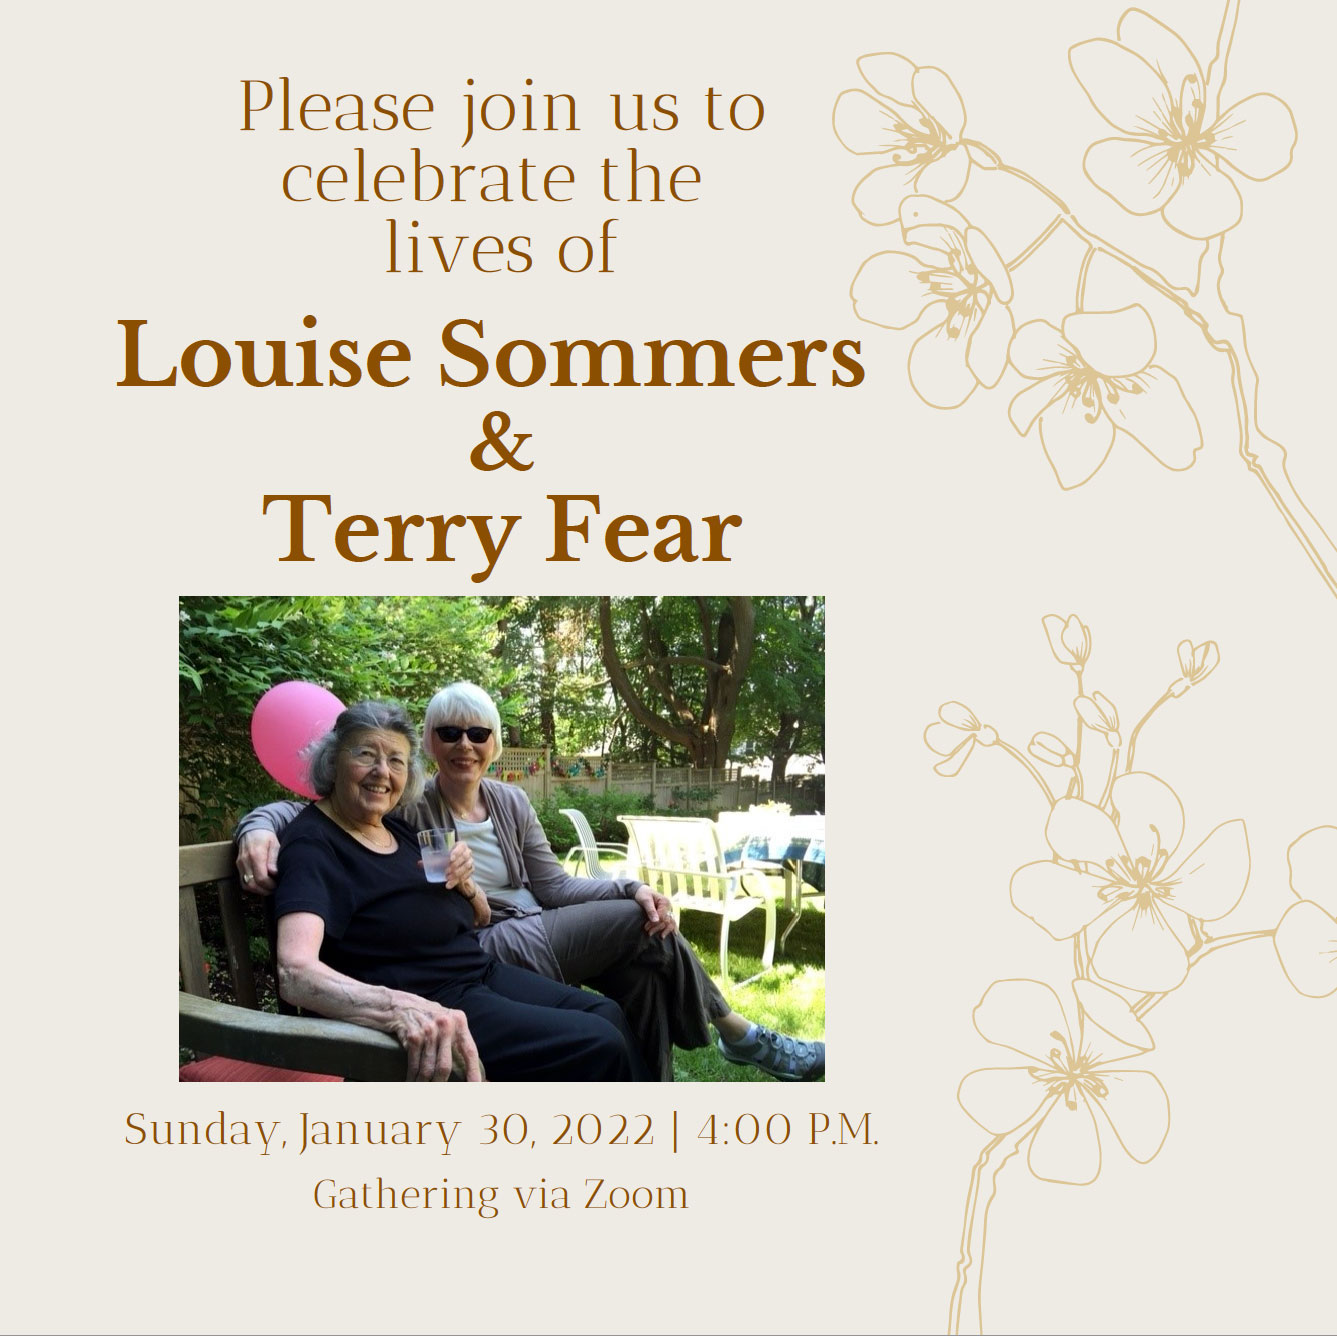 Celebration of Life in memory of Louise Sommers and Terry Fear for Sunday, January 30, 2022 @ United Hebrew Congregation Virtual Sanctuary